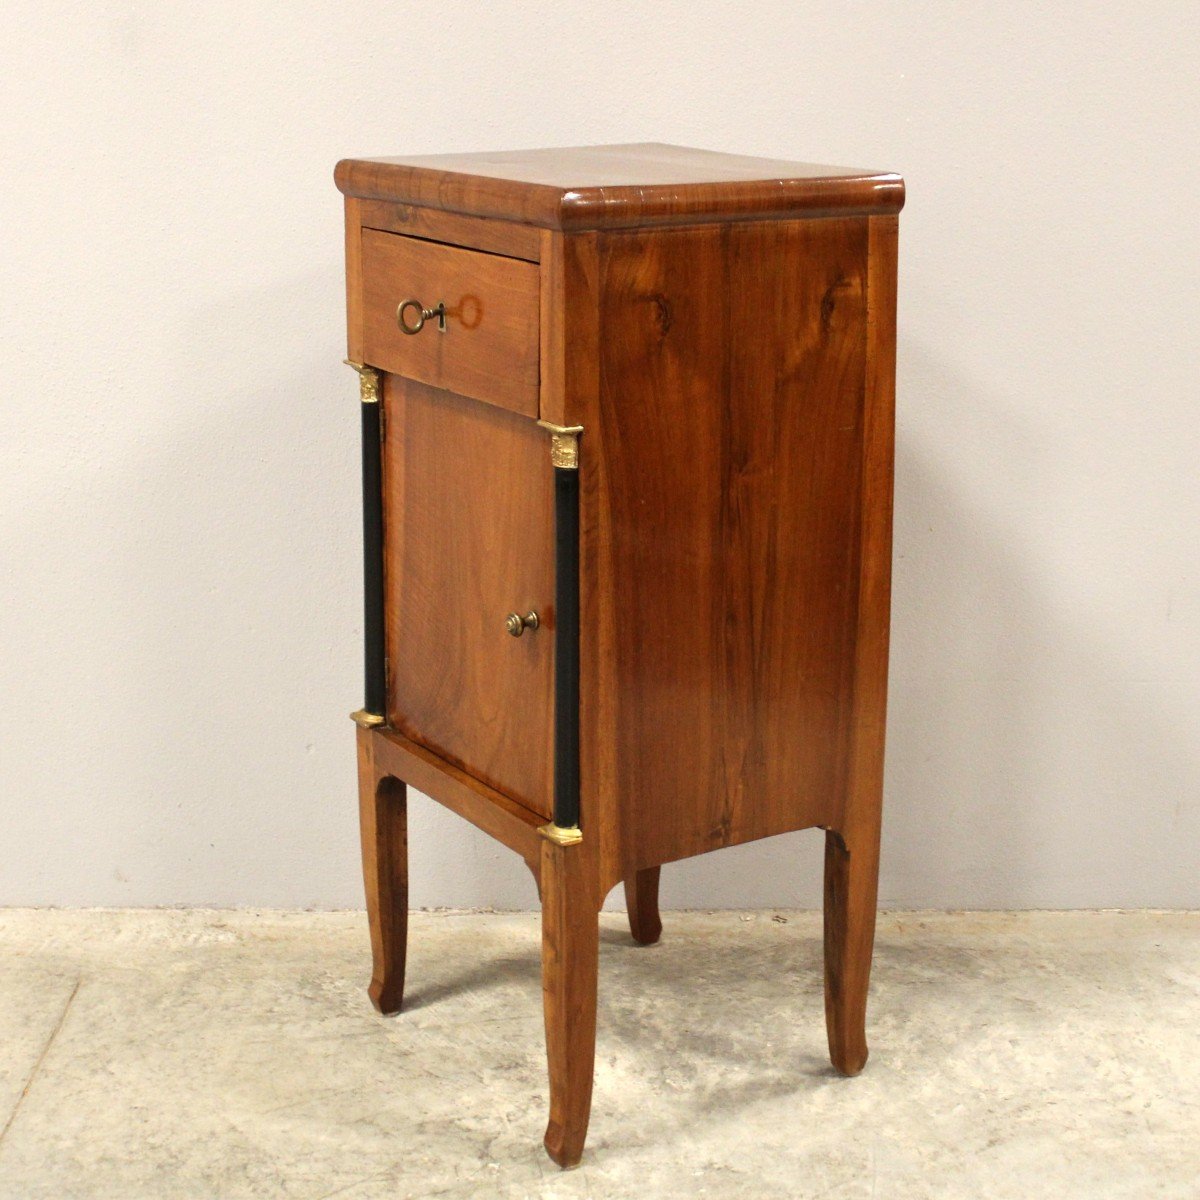 Antique Directoire Bedside Nightstand Table In Walnut - Italy 18th-photo-4